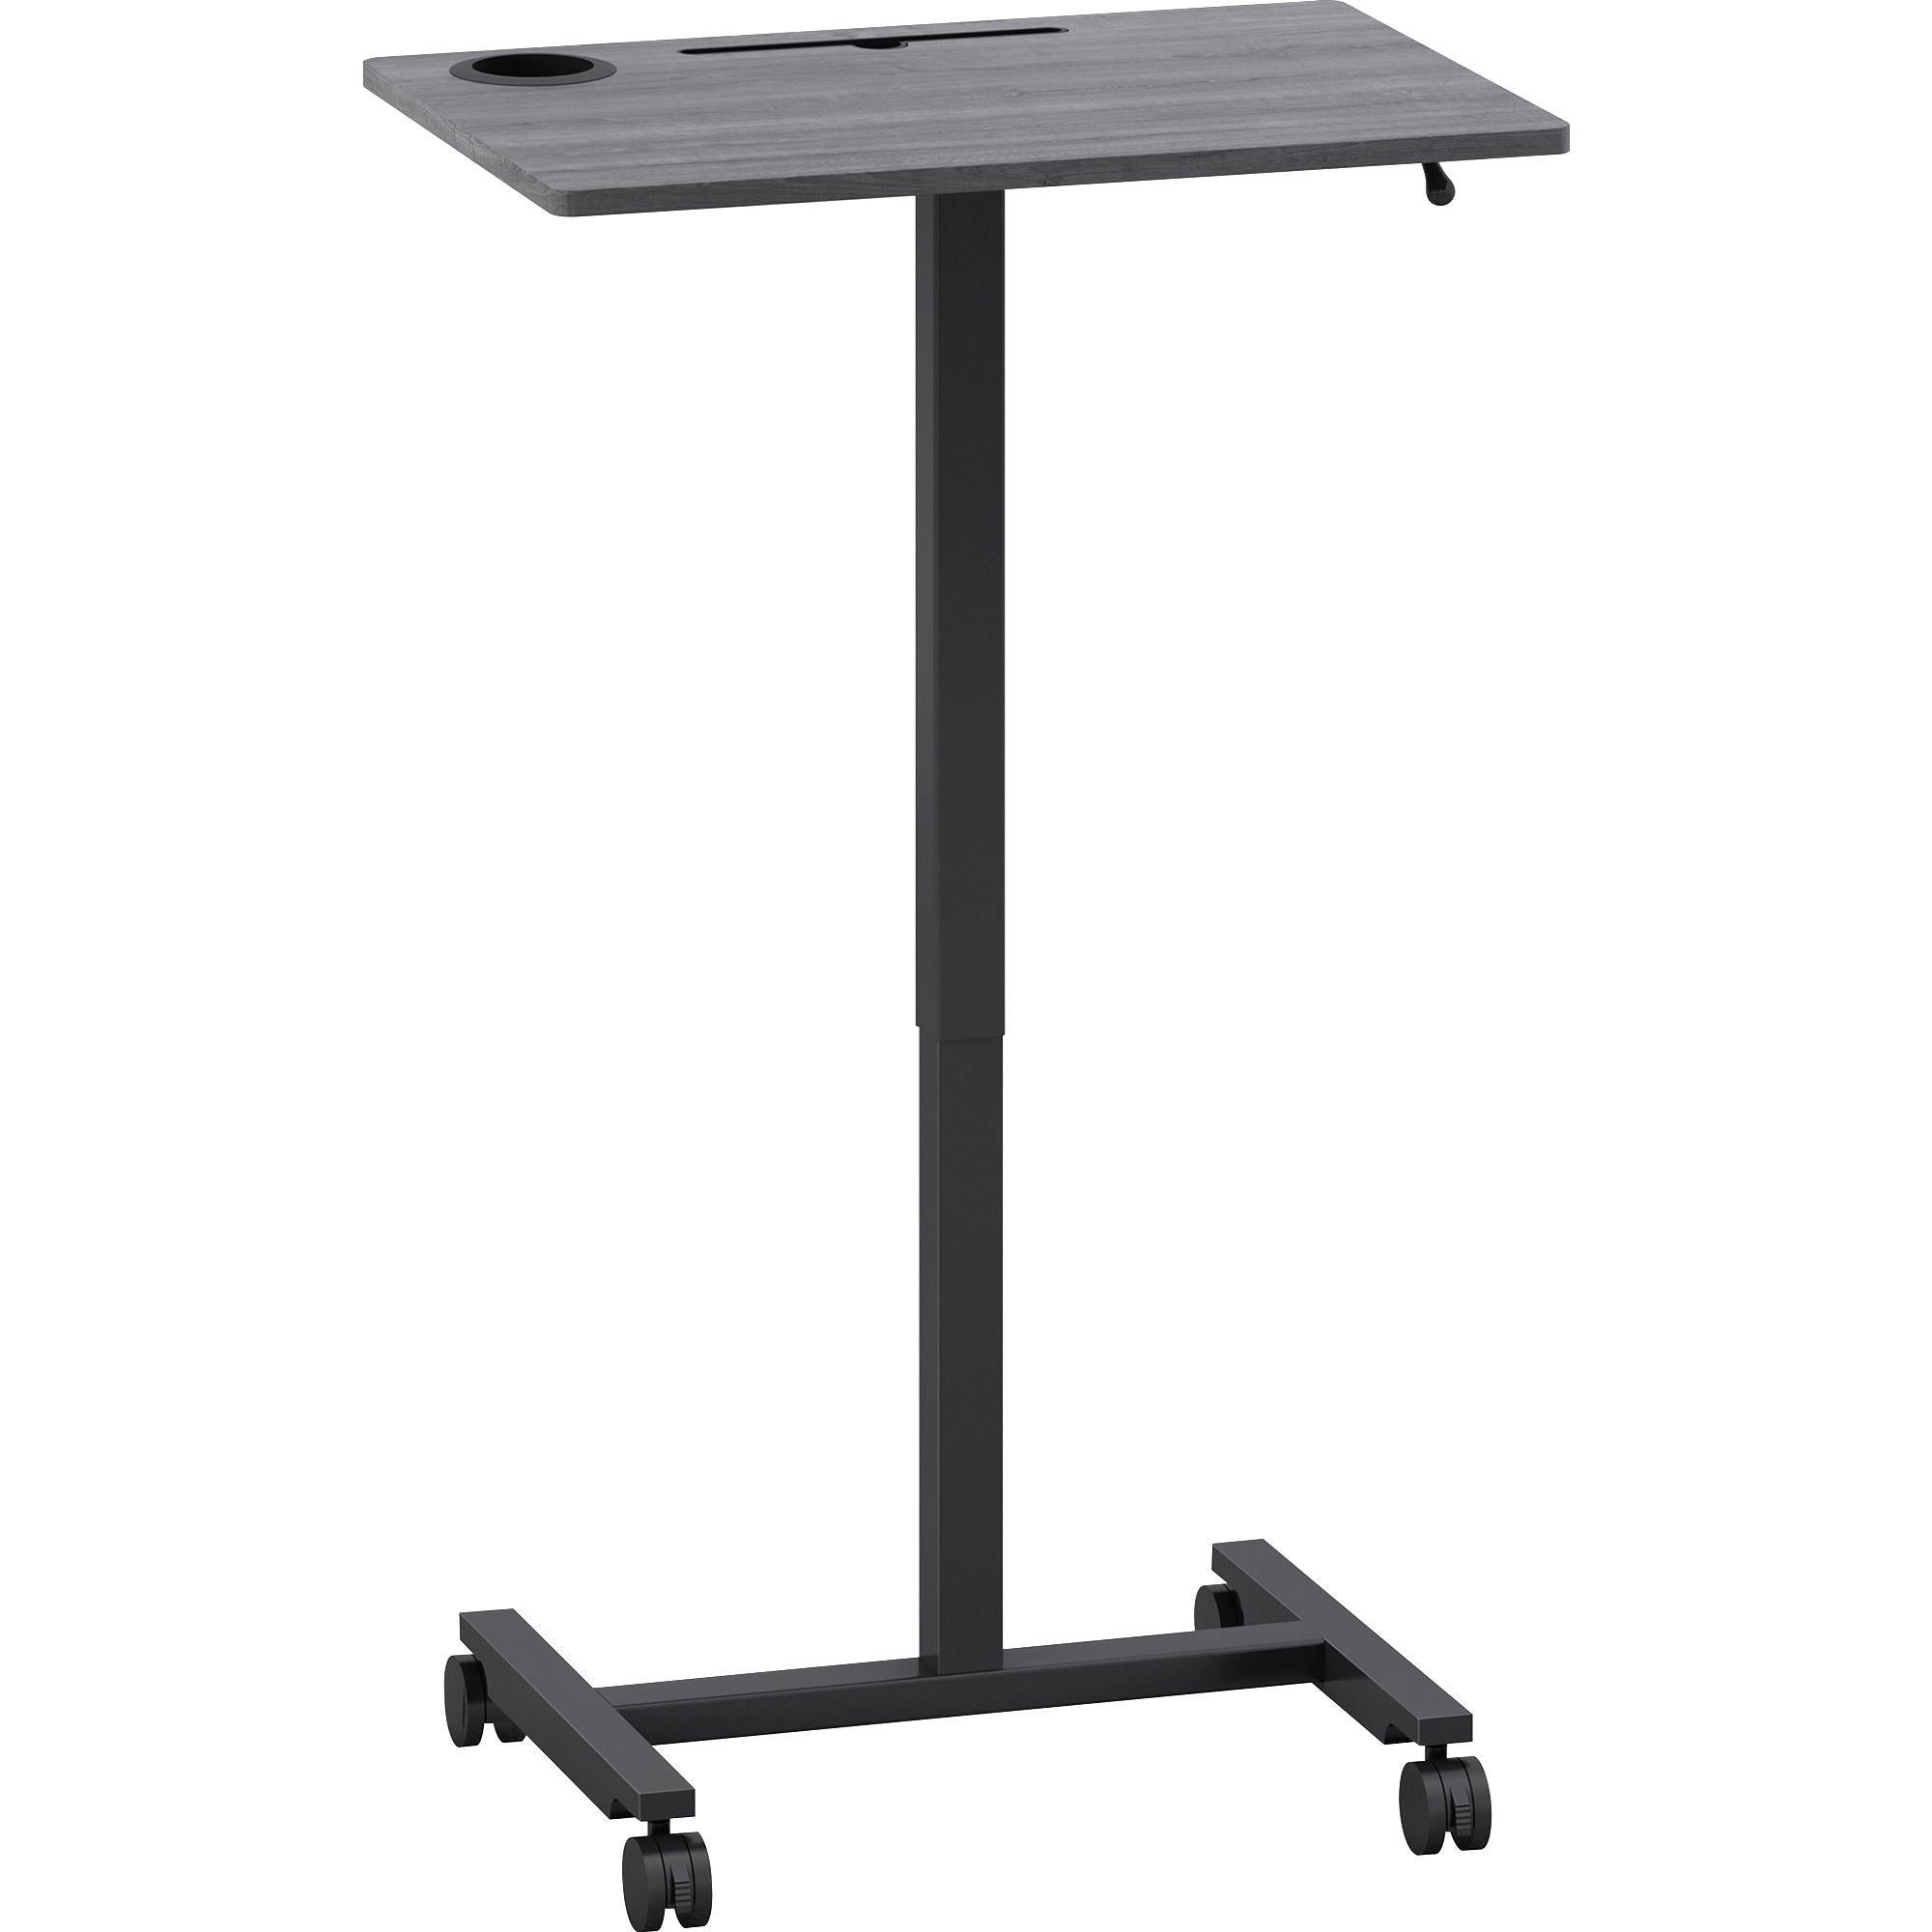 lorell-height-adjustable-mobile-desk-for-table-topweathered-charcoal-laminate-top-powder-coated-base-adjustable-height-30-to-4363-adjustment-43-height-x-2663-width-x-1913-depth-assembly-required-1-each_llr84837 - 6